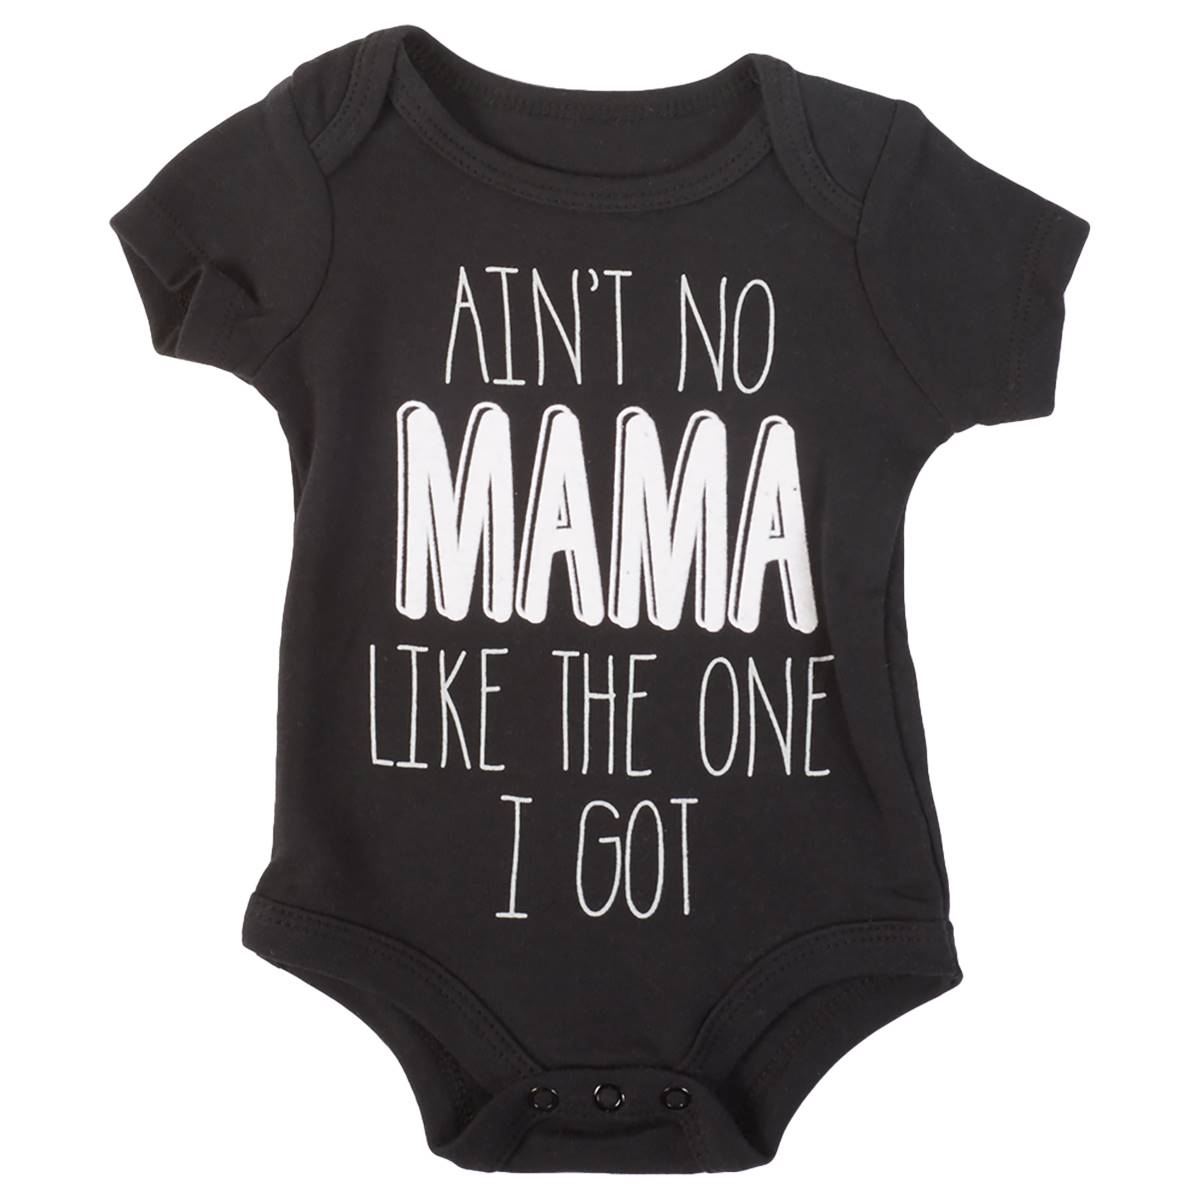 Baby Unisex (NB-9M) Babies With Attitude Ain't No Mama Bodysuit